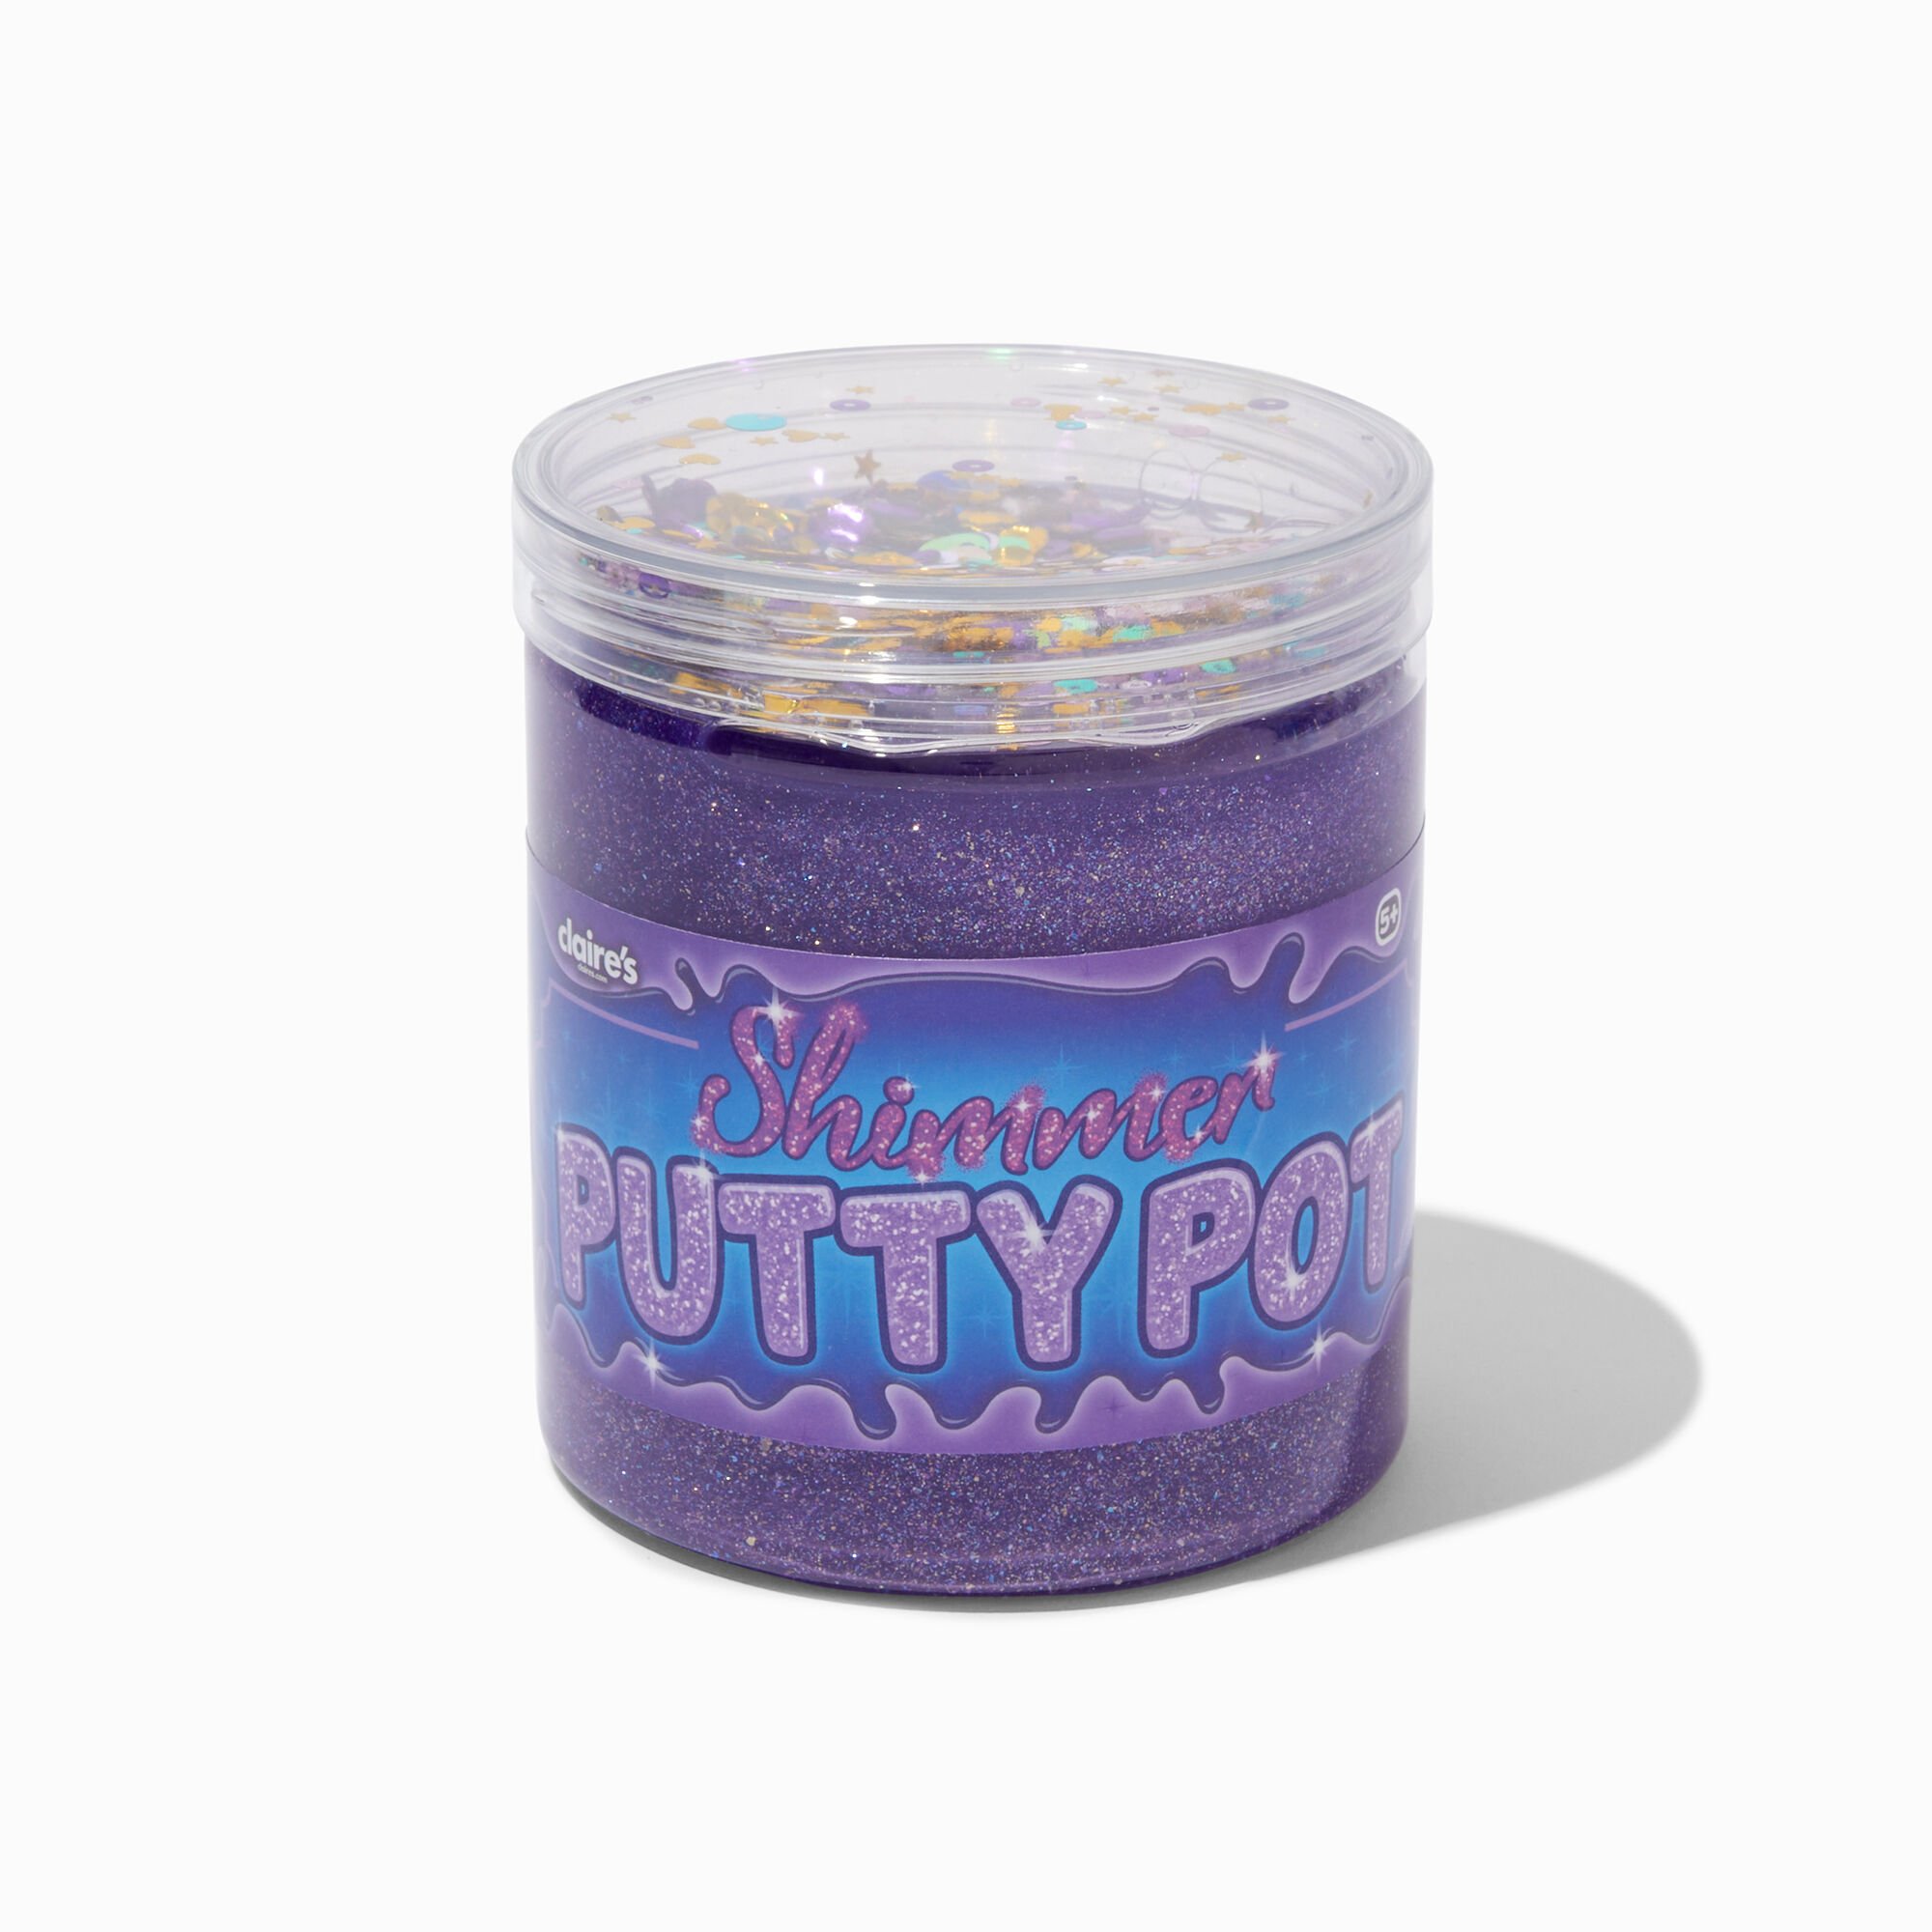 View Shimmer Claires Exclusive Putty Pot information